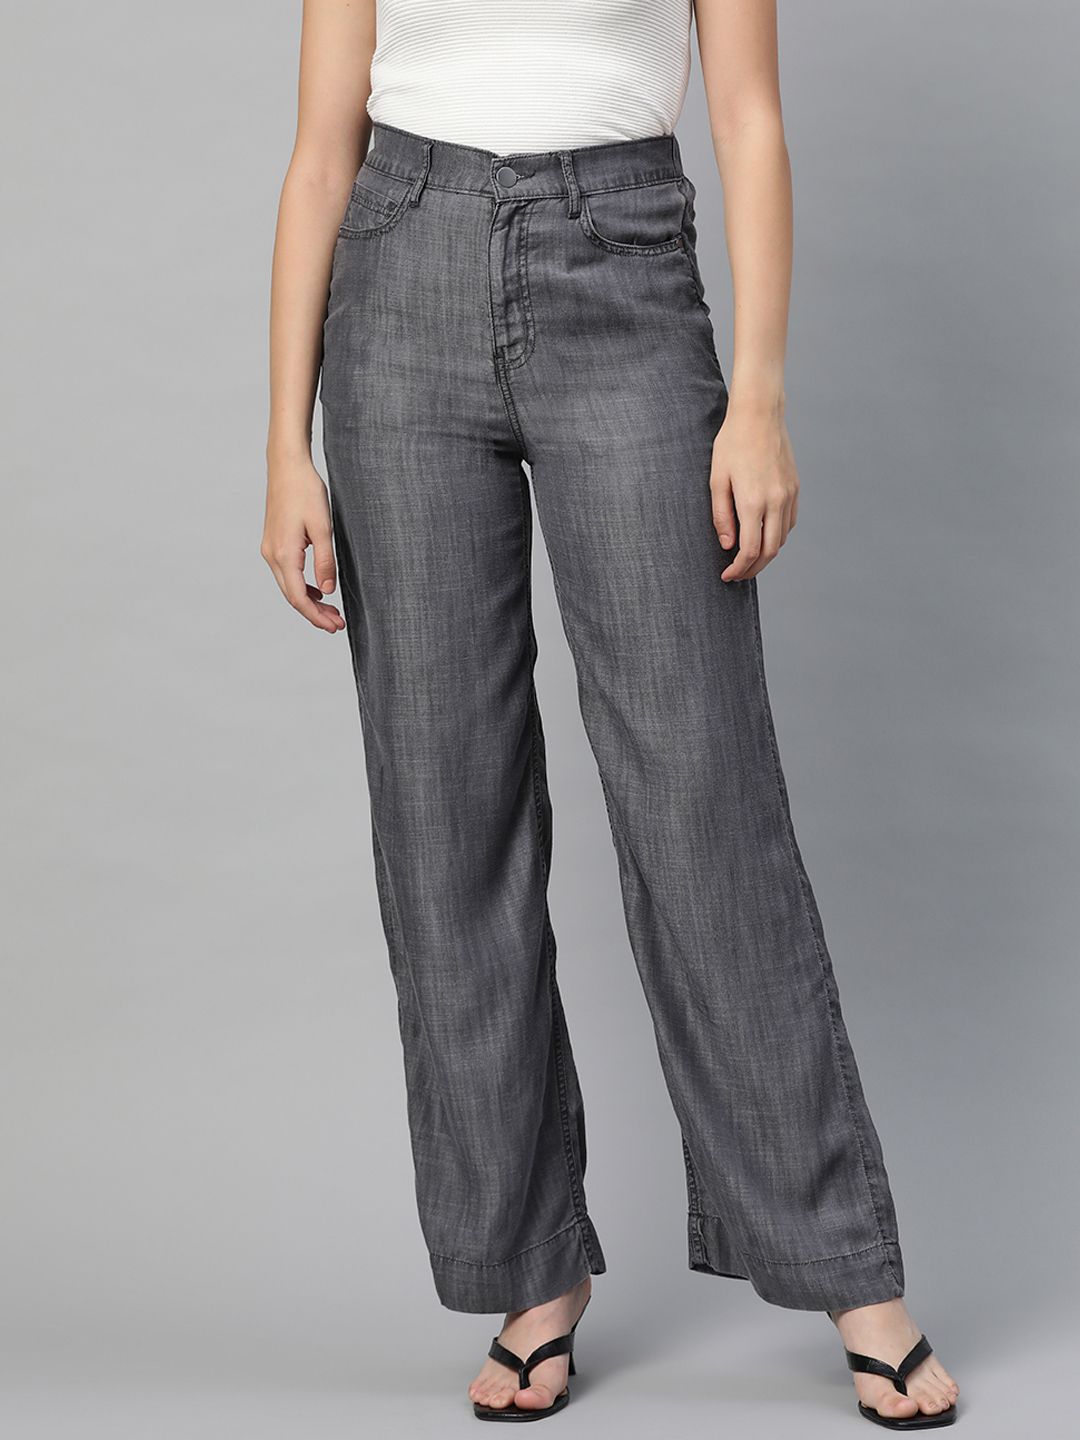 Marks & Spencer Women Charcoal Grey Solid Trousers Price in India